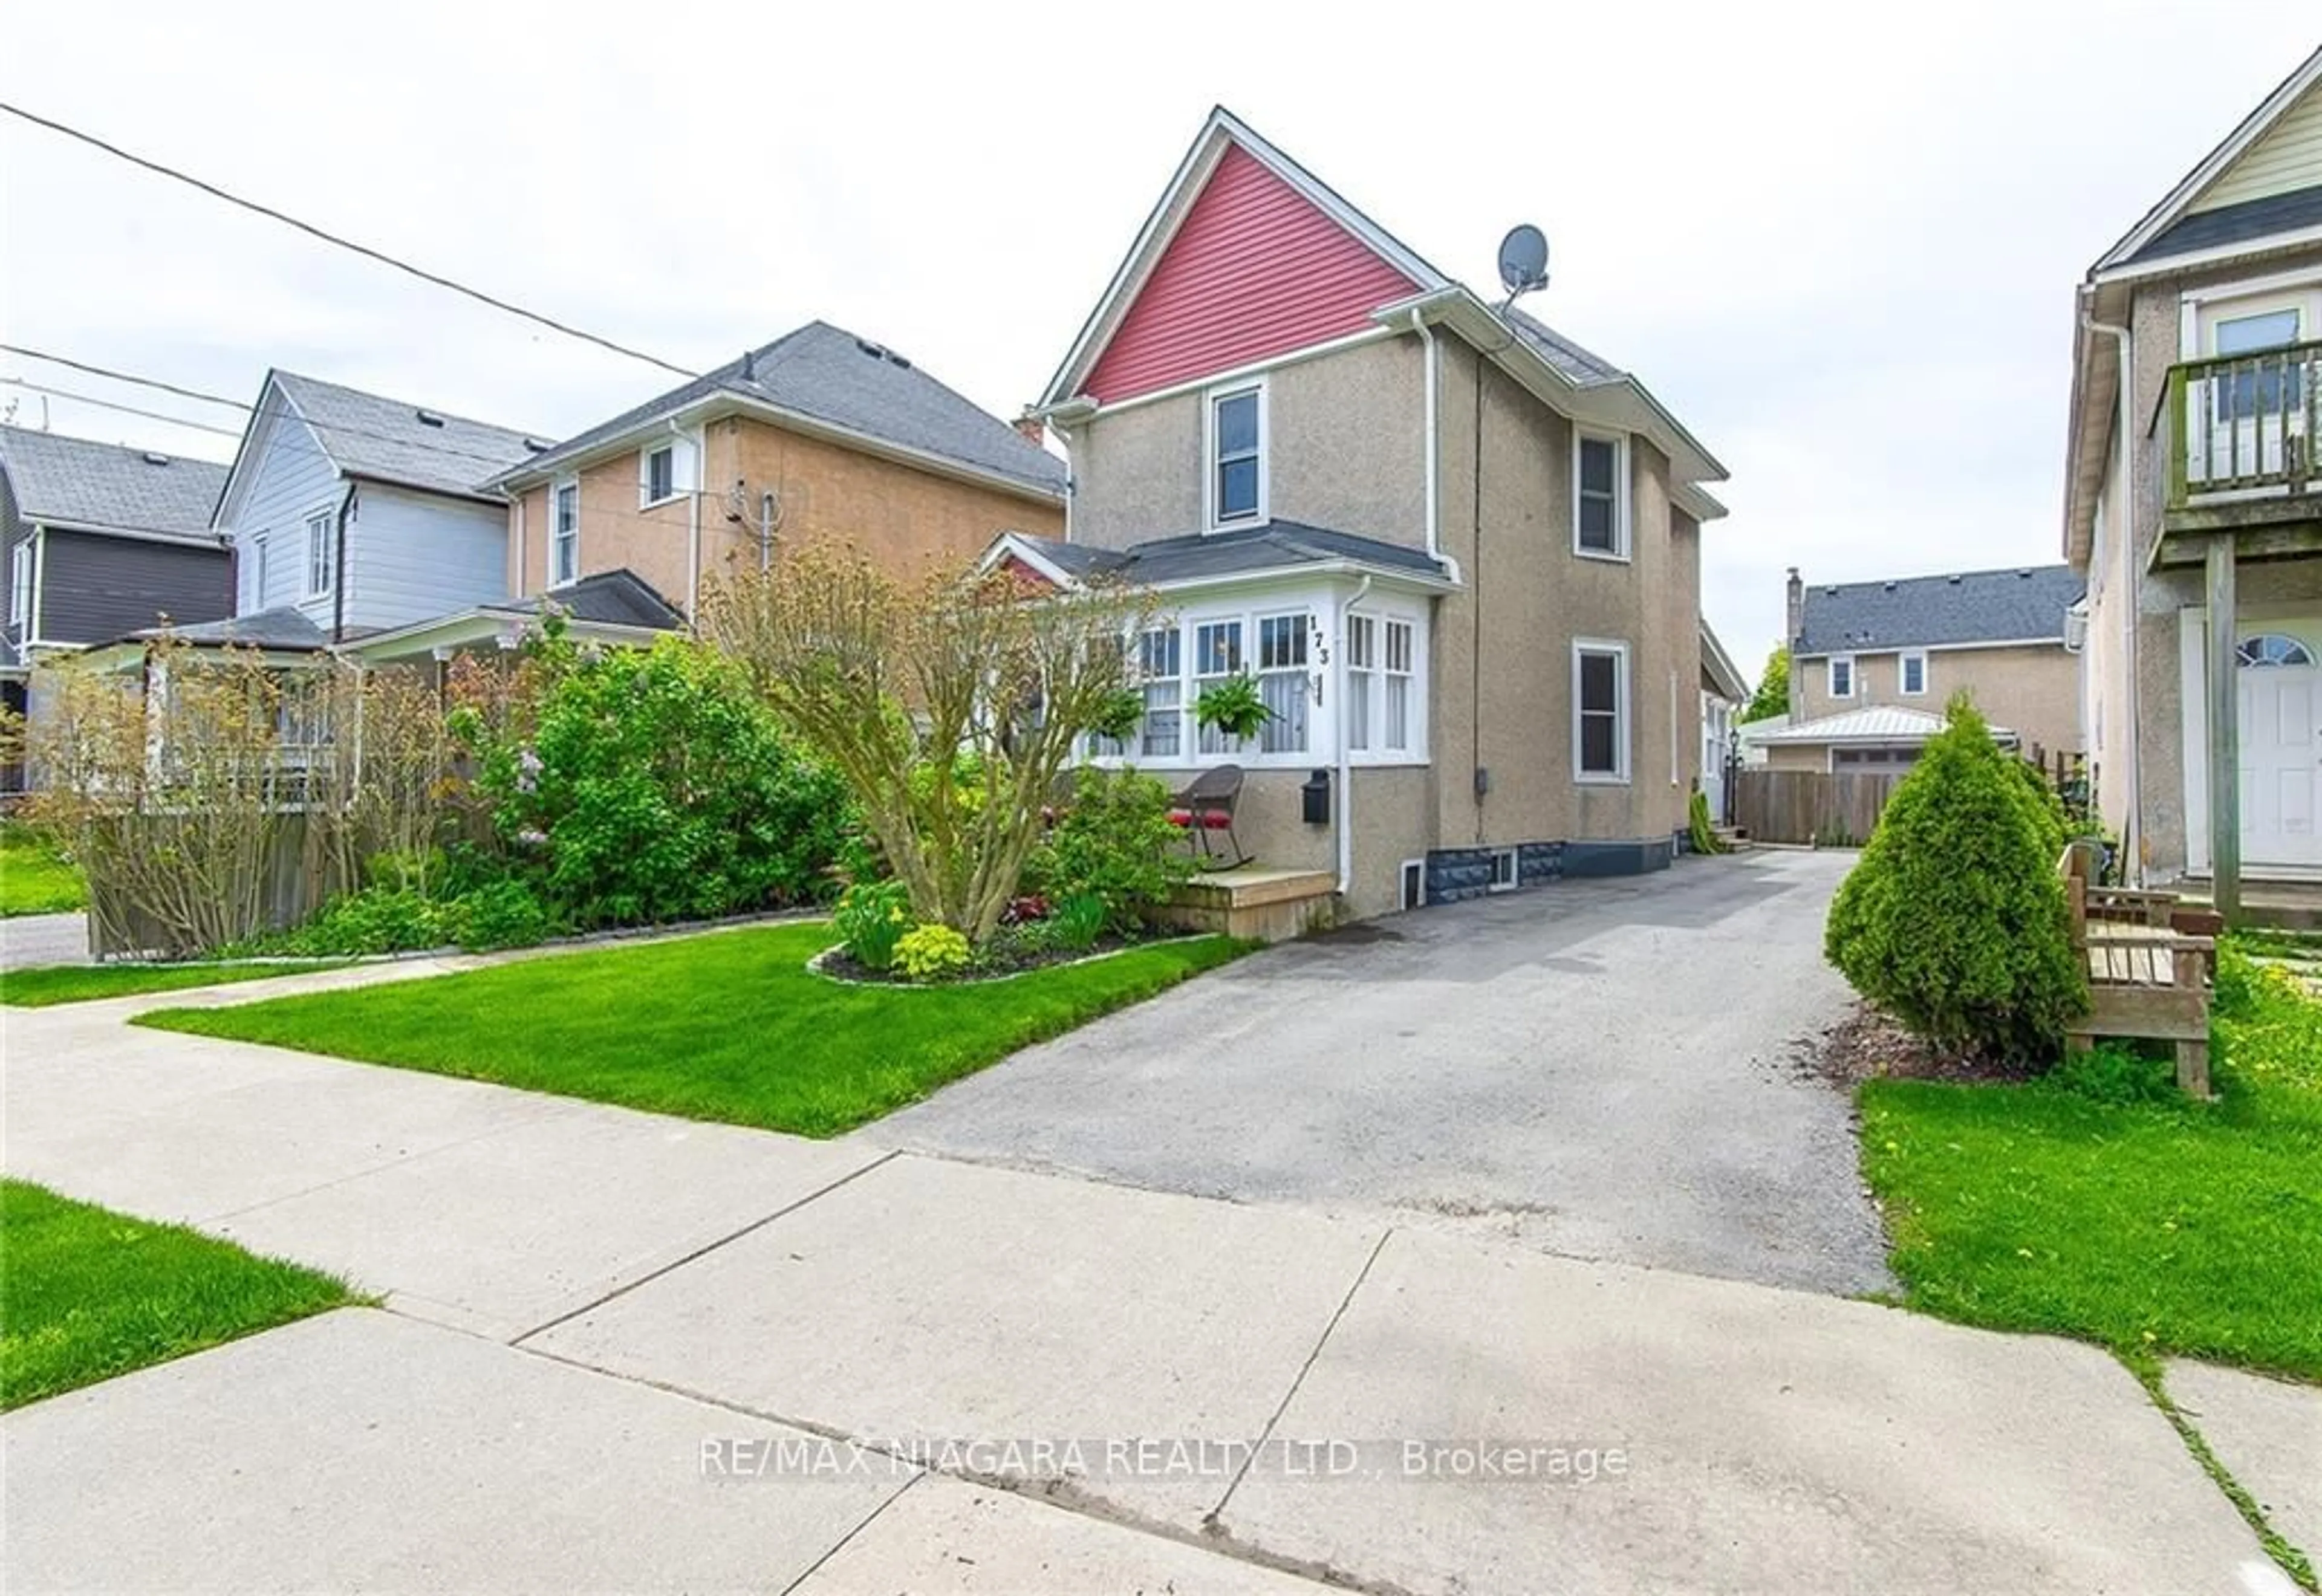 Frontside or backside of a home for 173 Young St, Welland Ontario L3B 4C9